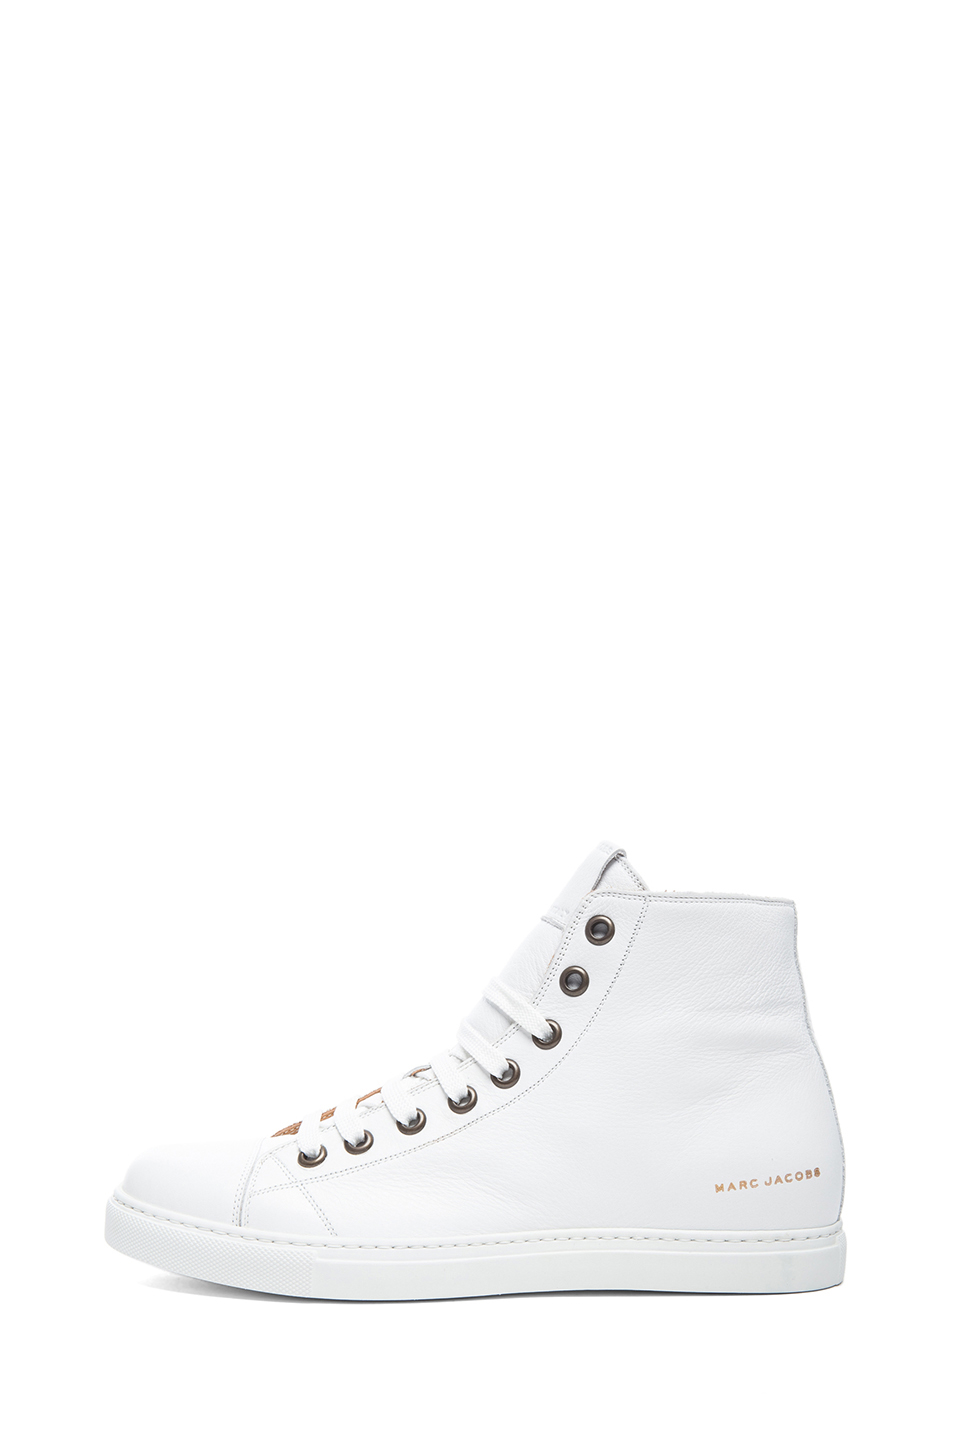 Lyst - Marc jacobs Mens High Top Leather Sneakers in White